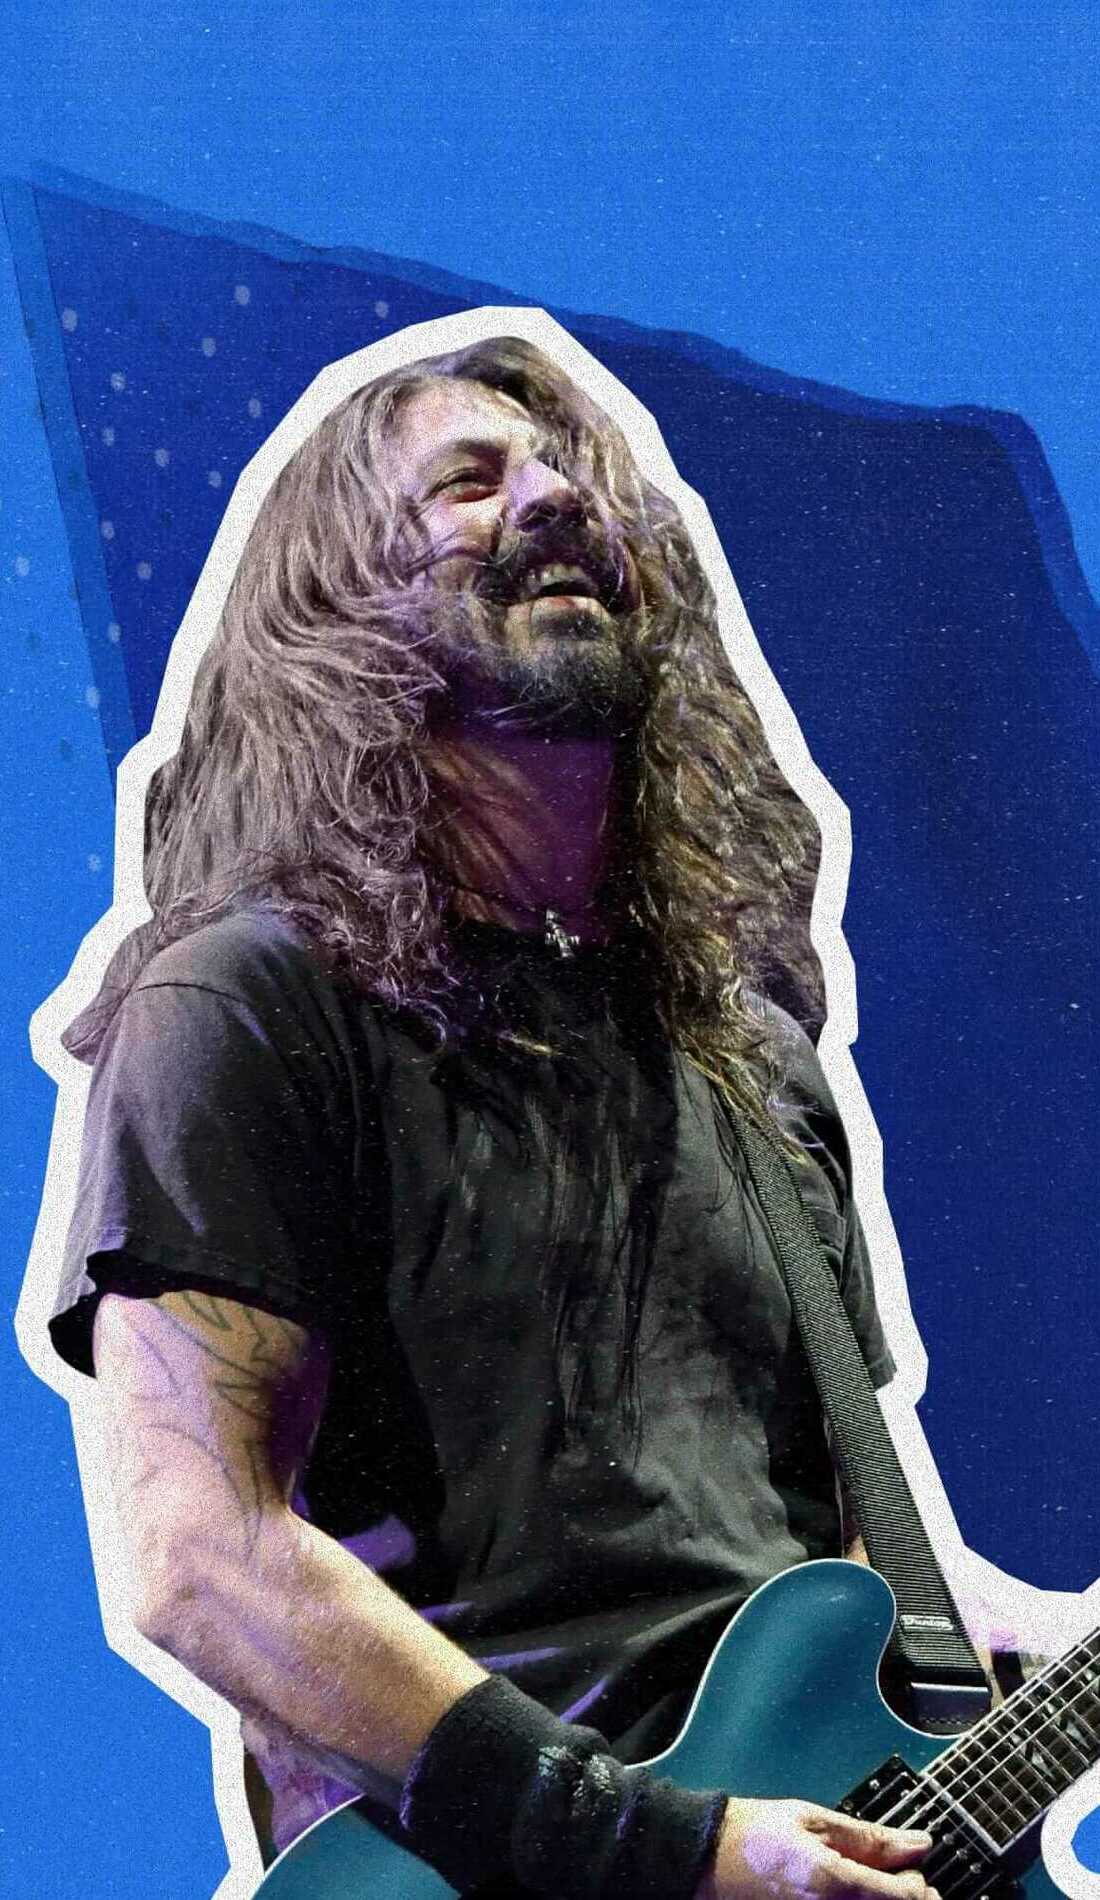 A Foo Fighters live event